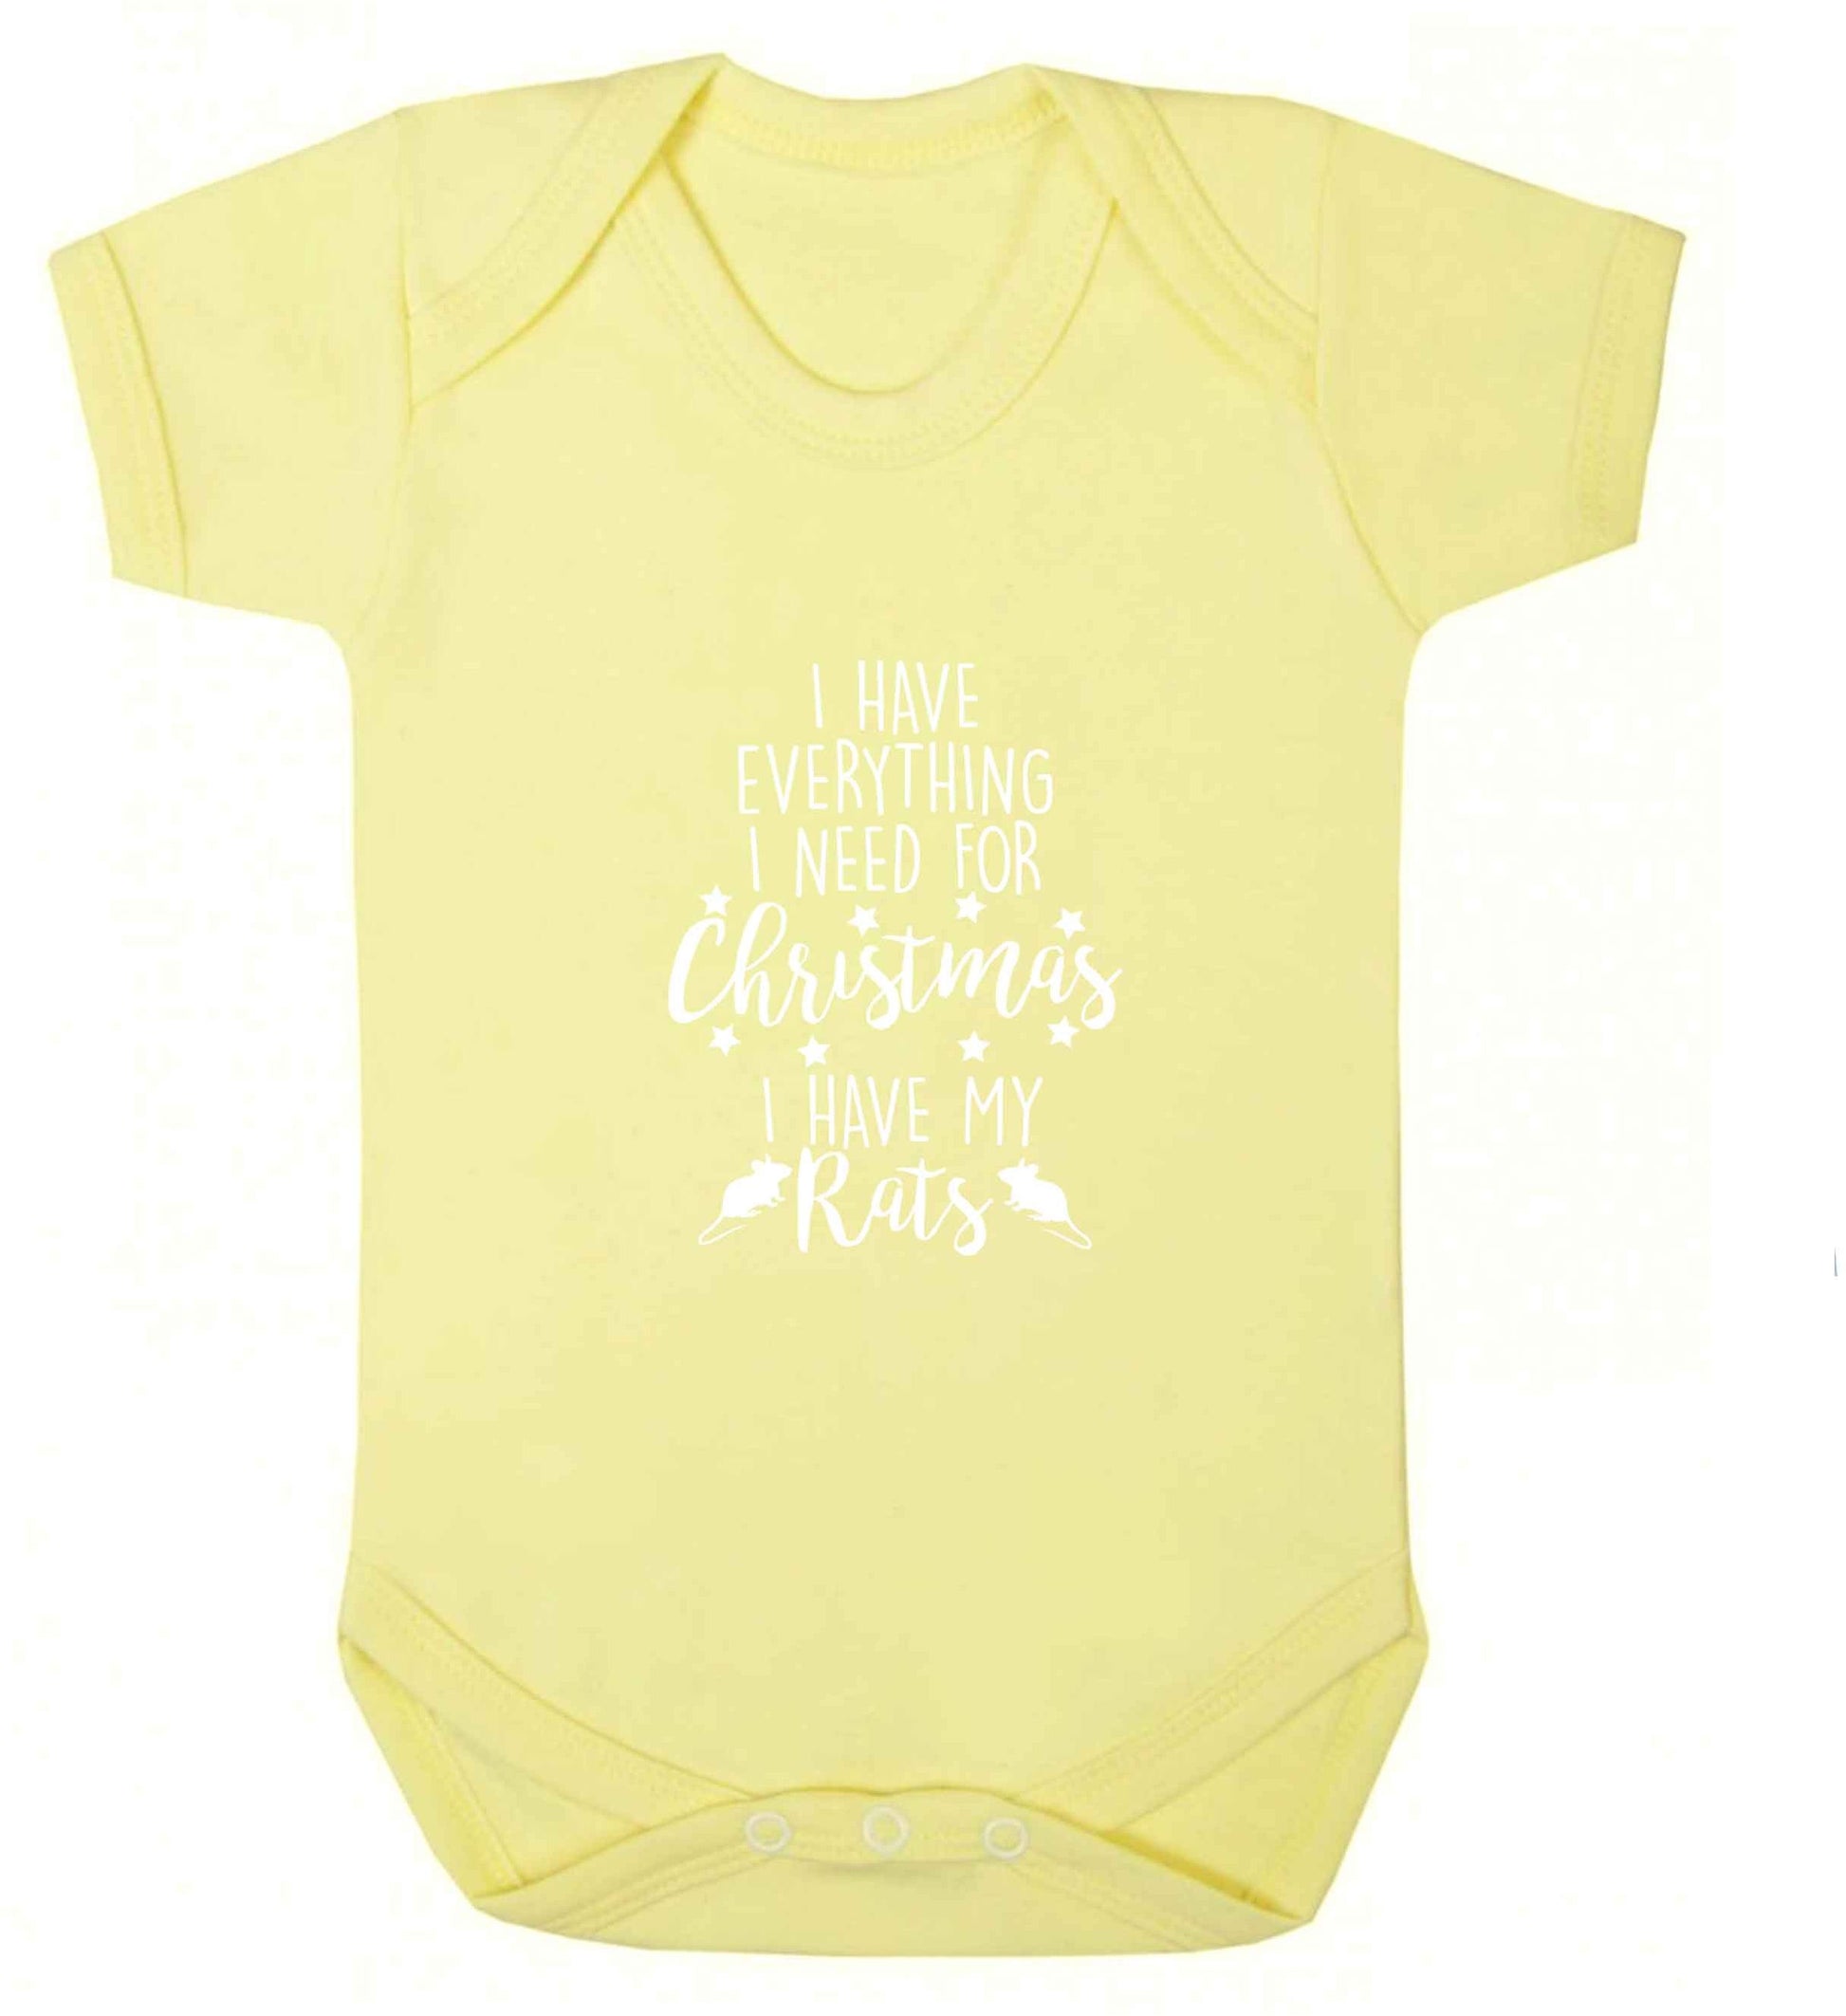 I have everything I need for Christmas I have my rats baby vest pale yellow 18-24 months